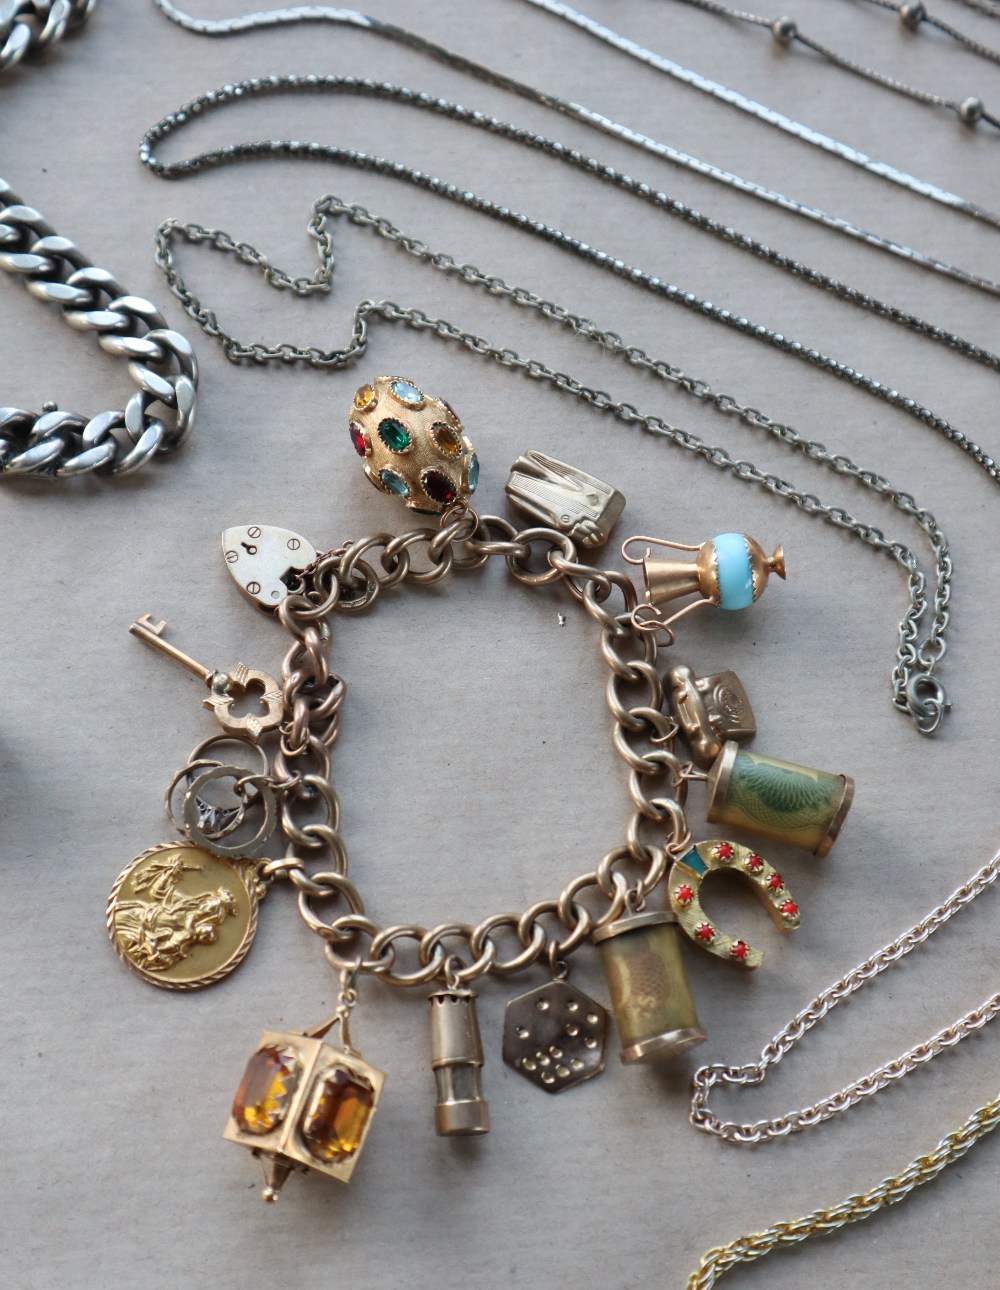 A 9ct yellow gold bracelet set with numerous charms including a lighter, telephone, miners lamp, St.